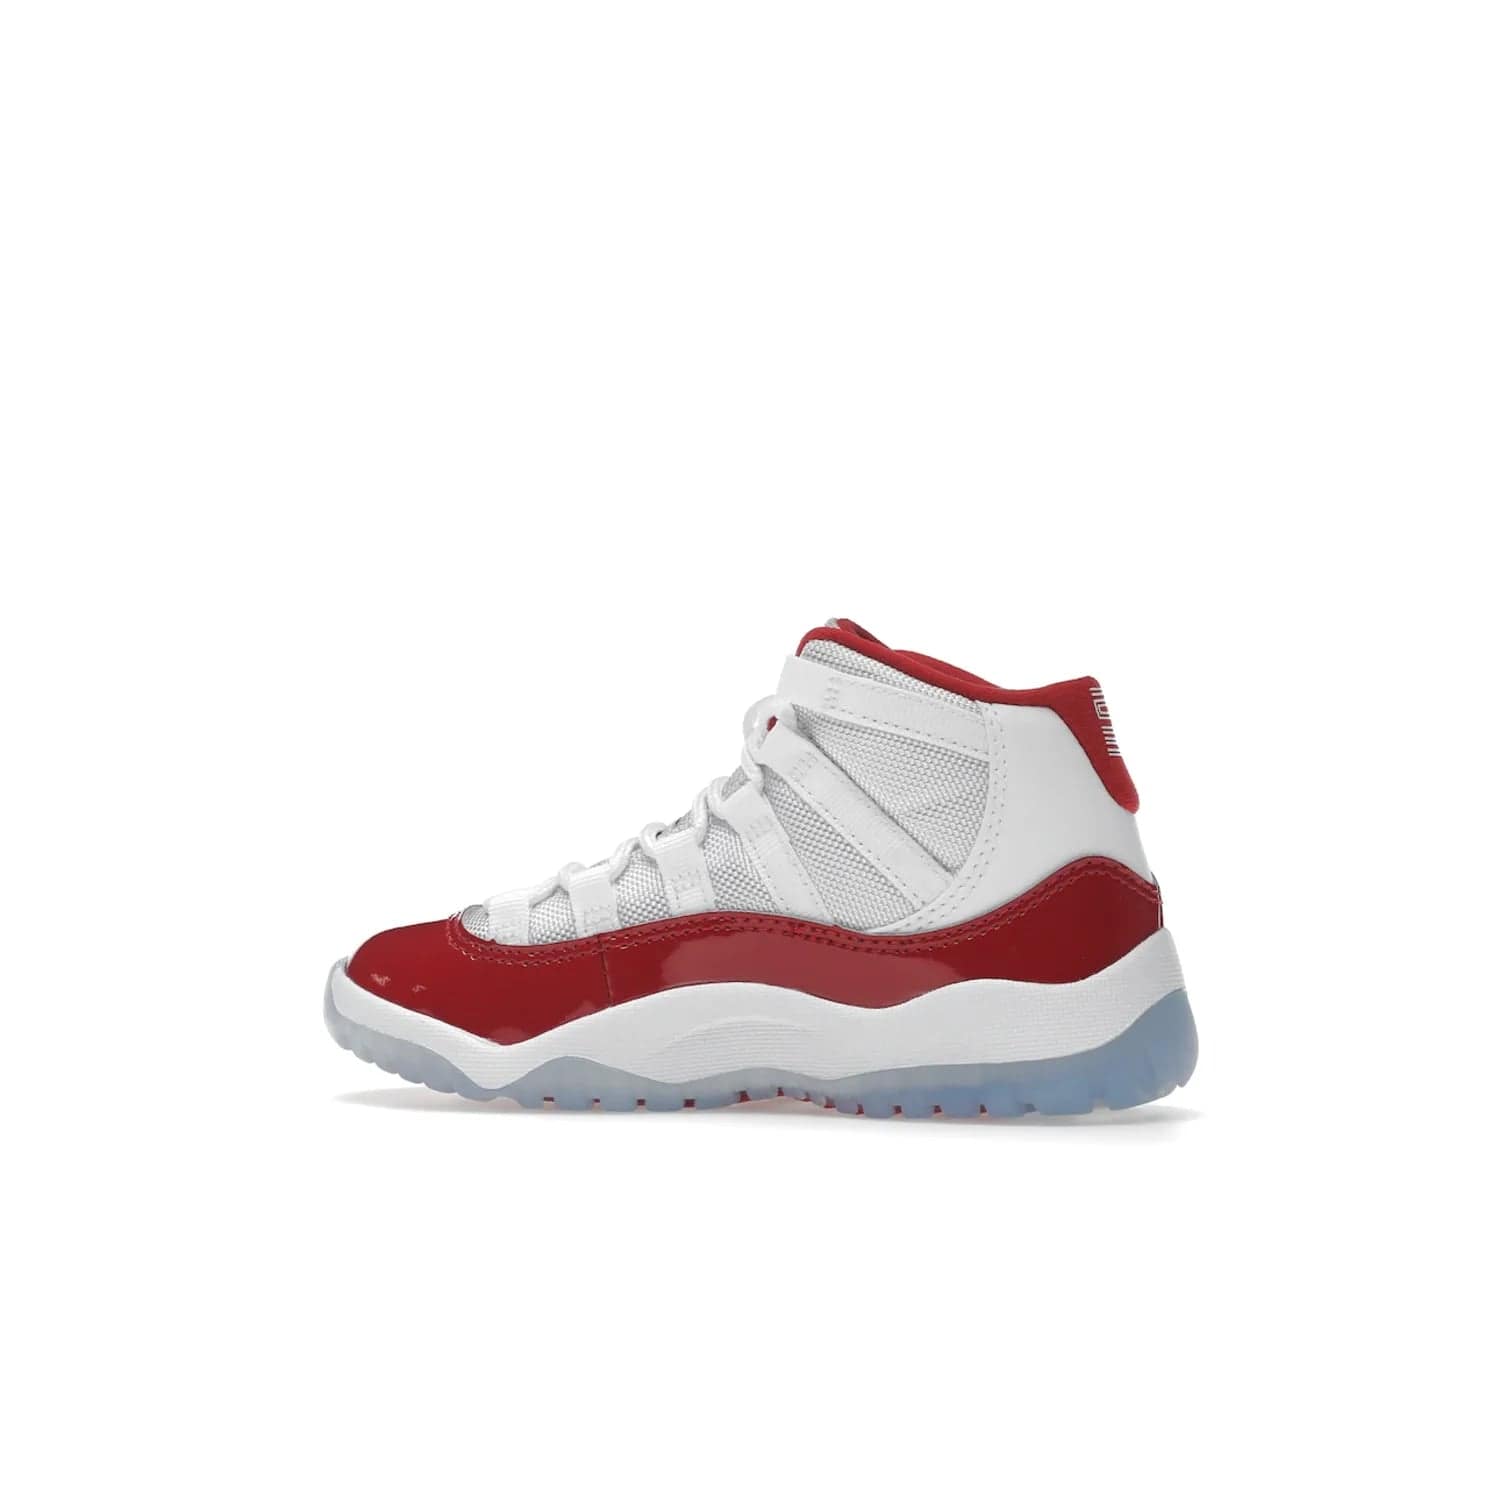 Jordan 11 Retro Cherry (2022) (PS) - Image 21 - Only at www.BallersClubKickz.com - An iconic silhouette with a timeless look, the Air Jordan 11 Retro Cherry 2022 PS features a crisp White, Varsity Red and Black colorway. The upper is made of ballistic mesh, a red patent leather mudguard, '23' branding and white Phylon midsole. Get optimal cushioning and comfort on December 10th, 2022. Don't miss out.